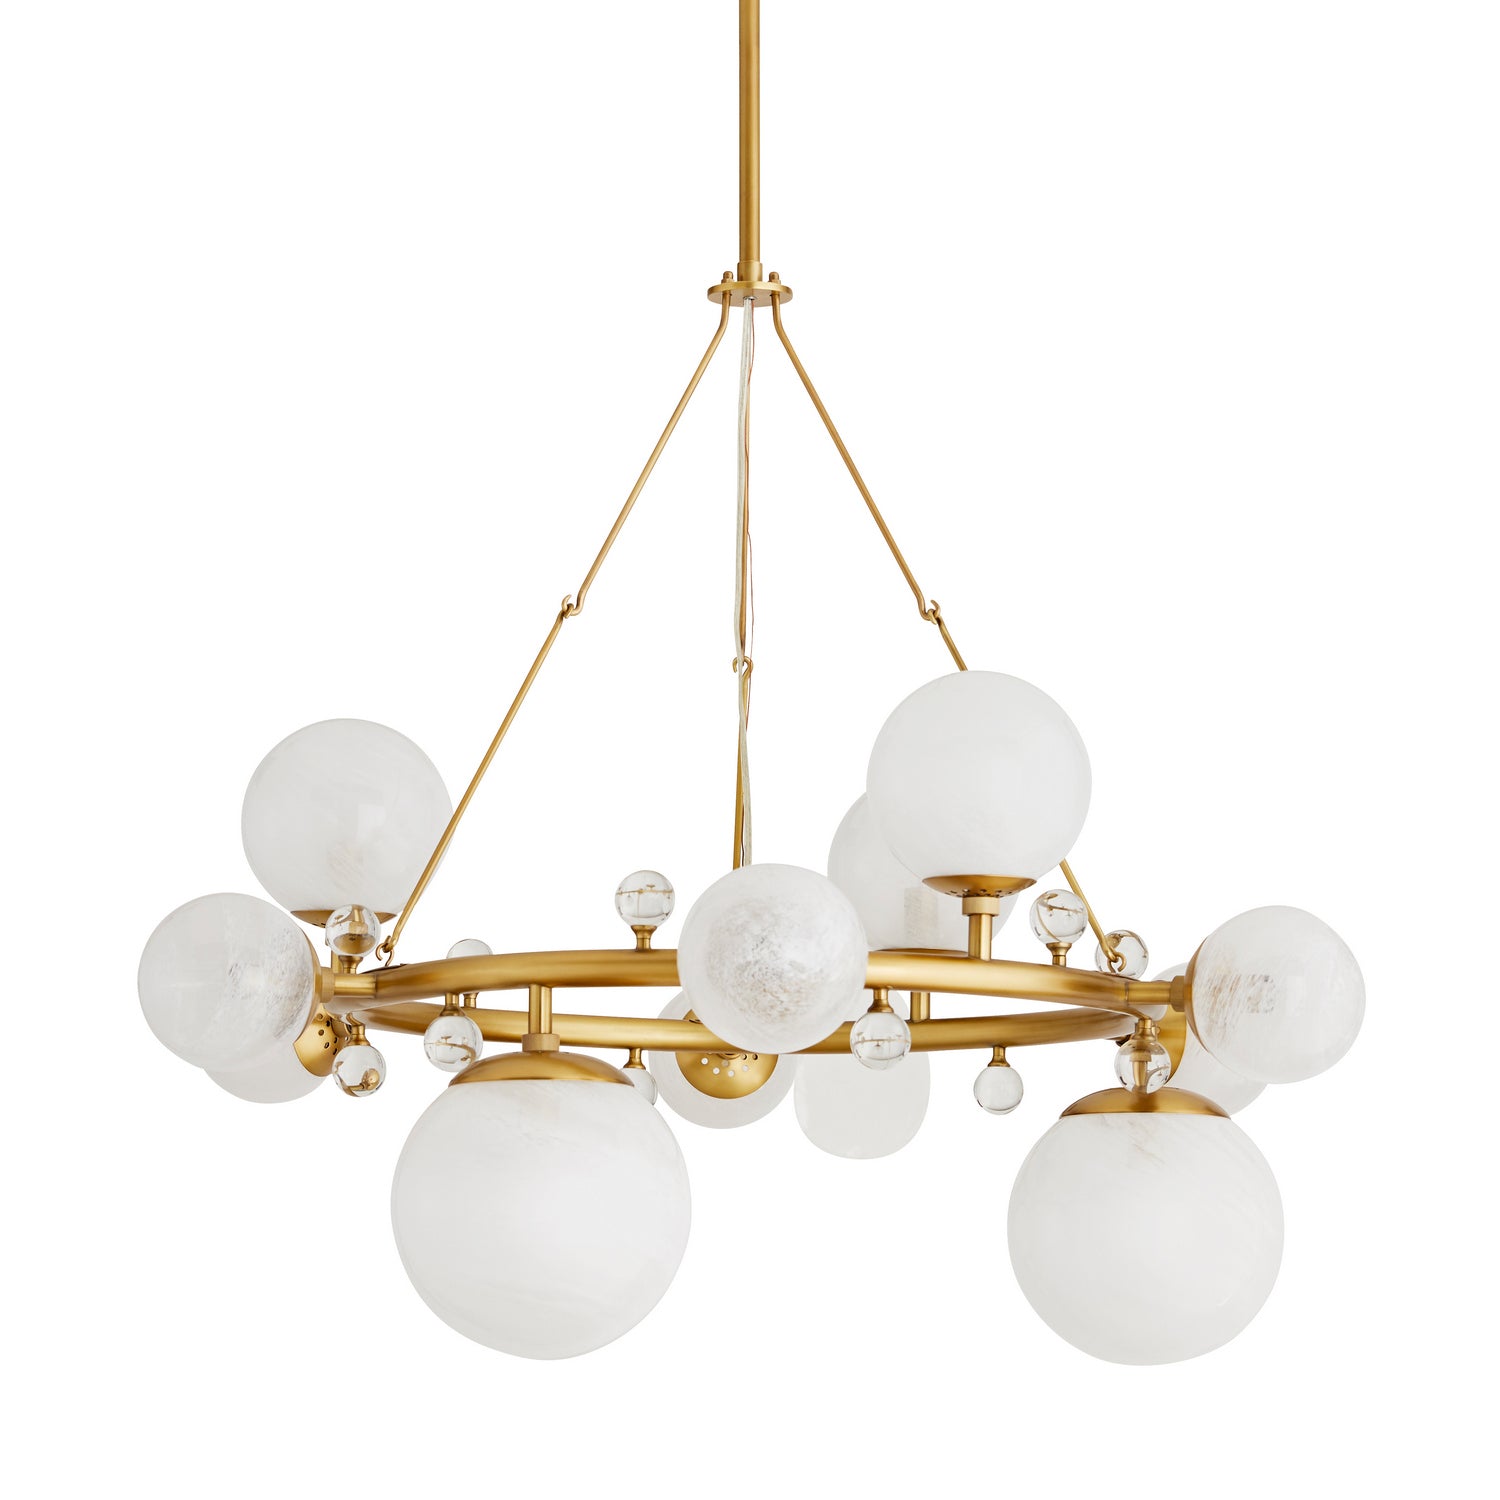 12 Light Chandelier from the Troon collection in Antique Brass finish